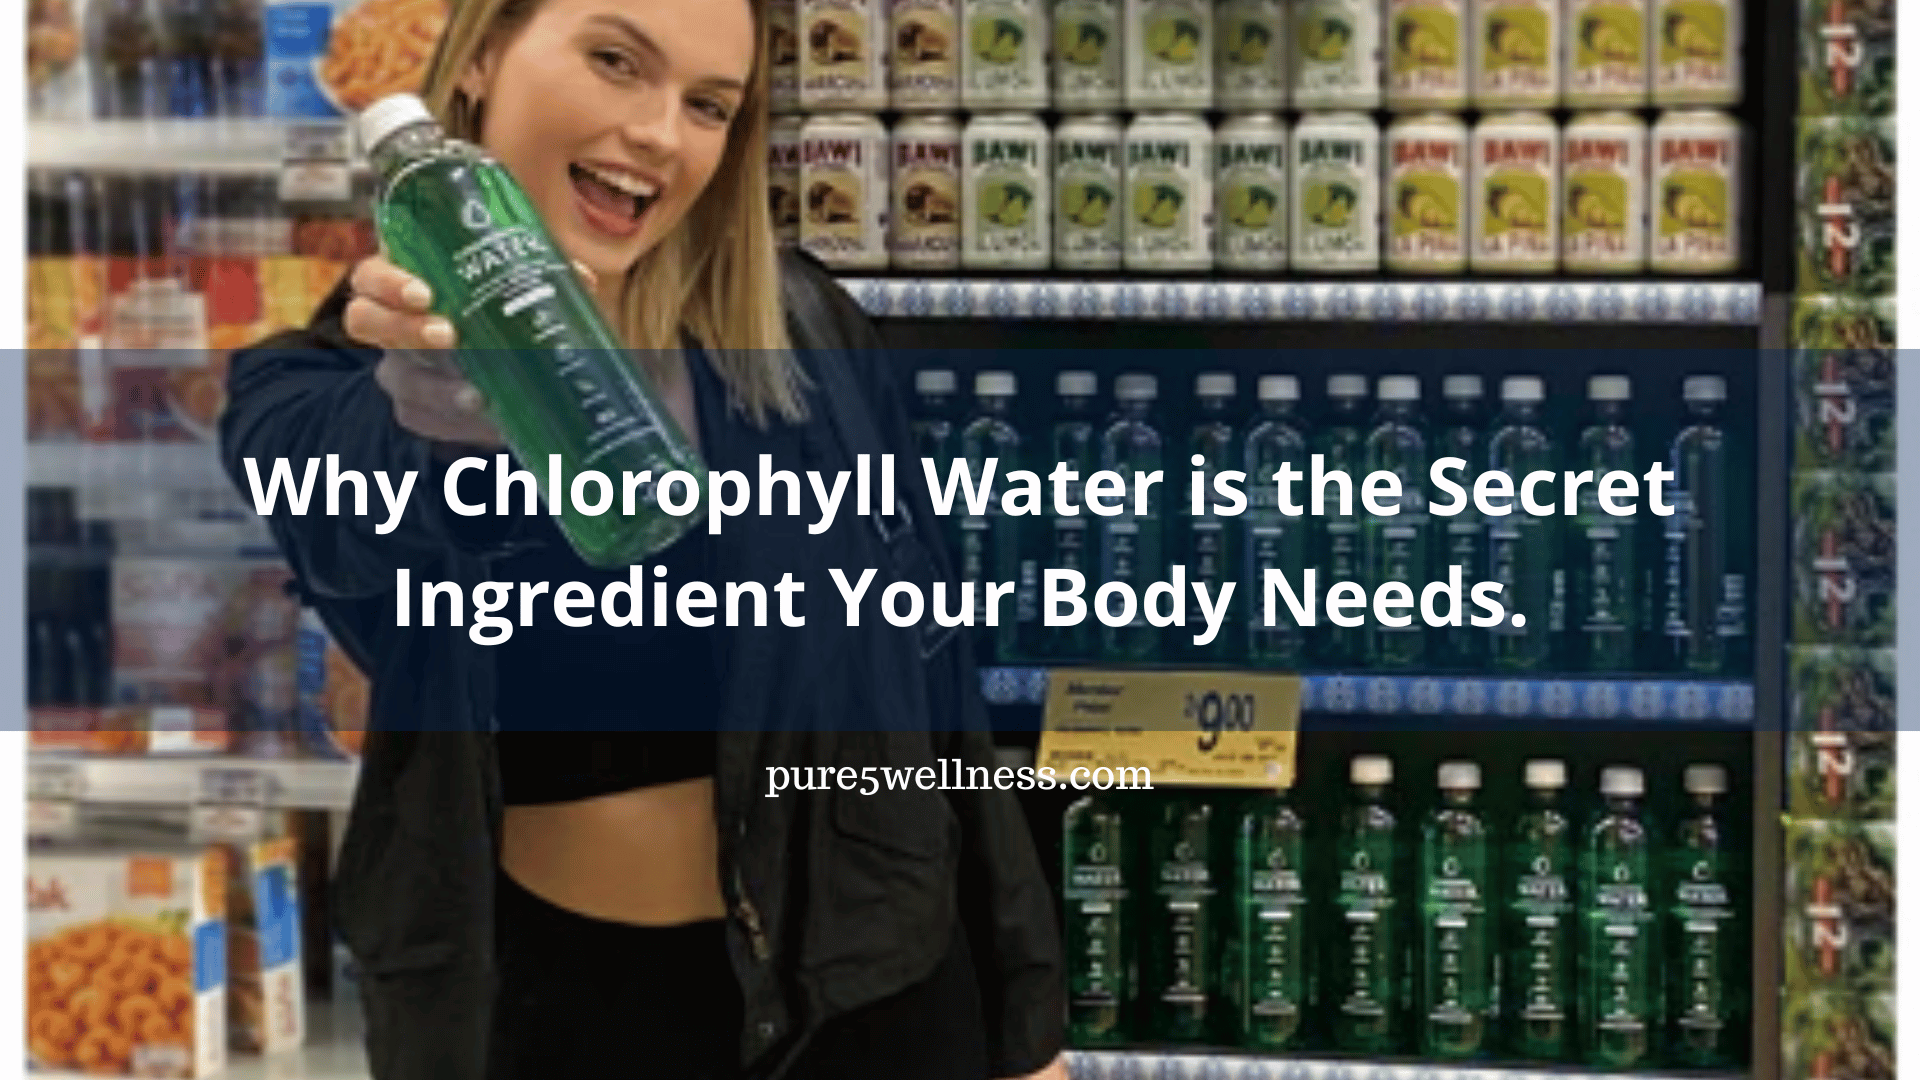 Chlorophyll Water: Why Chlorophyll Water is the Secret Ingredient Your Body needs